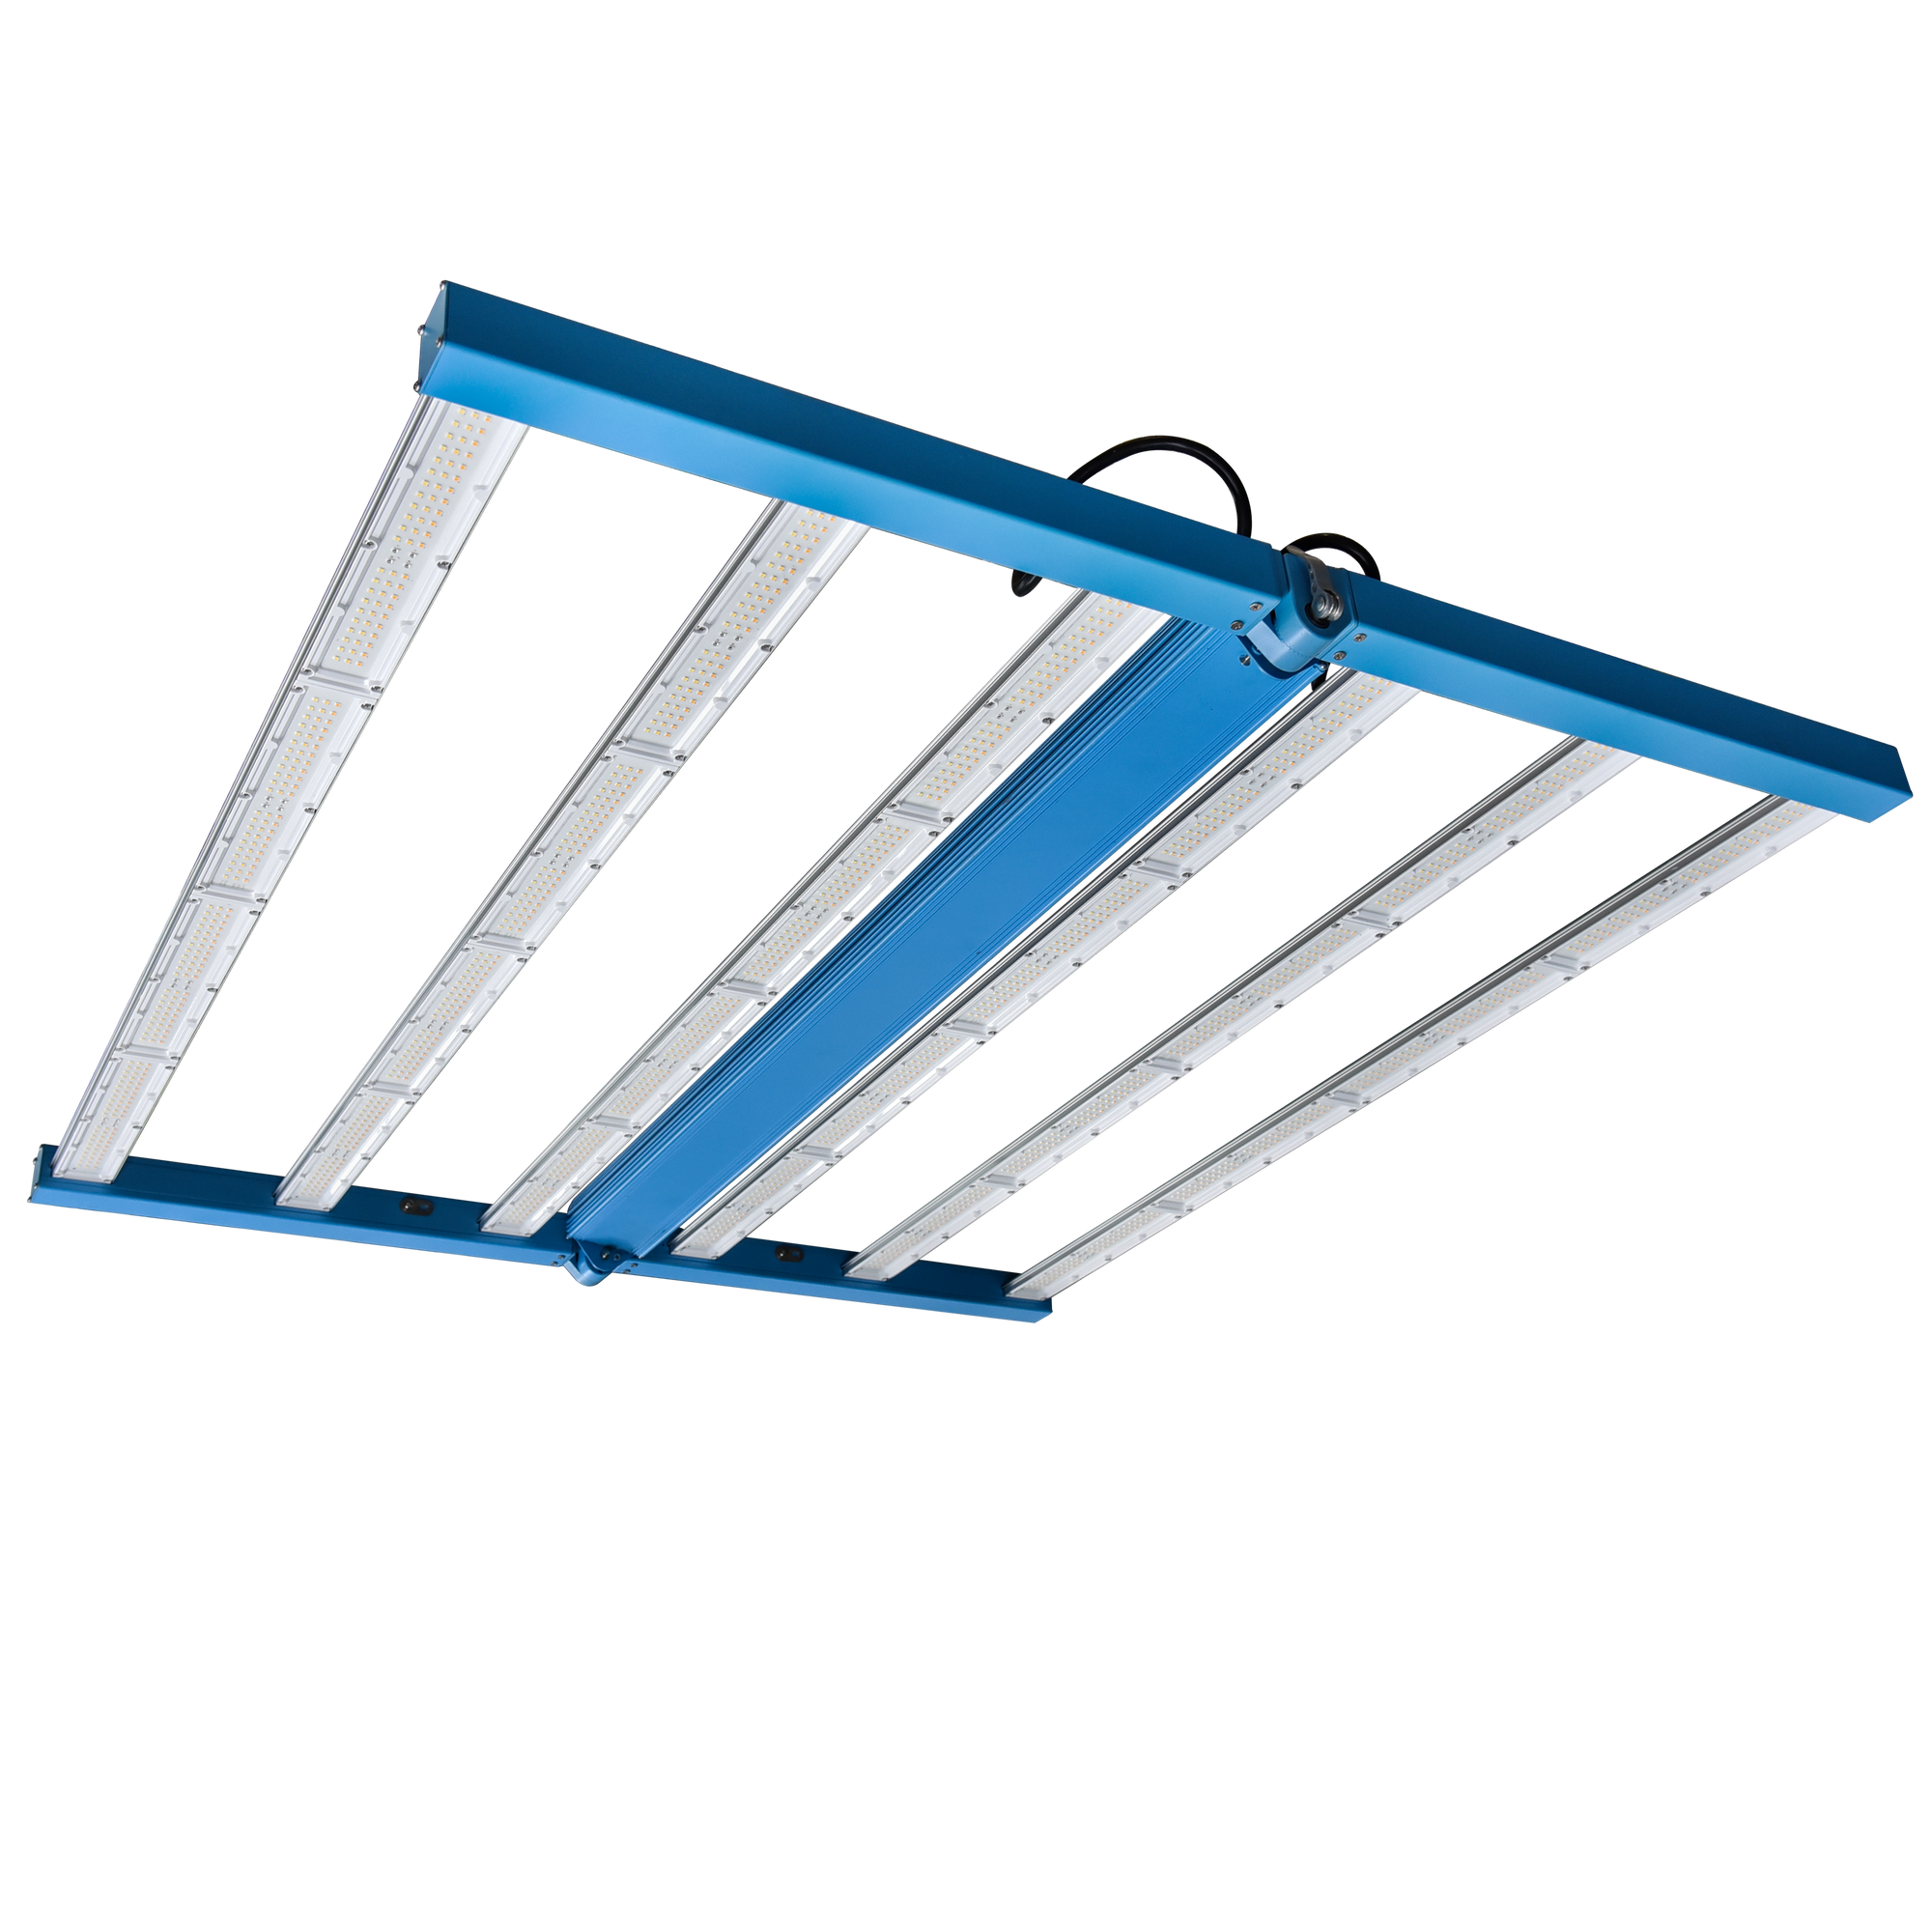 USA STOCK SYLSTAR 630W 6Bars Quickstar LED Grow Light Foldable for Indoor Plant, Full Spectrum and High PPF/PAR 3500K for Veg and Bloom